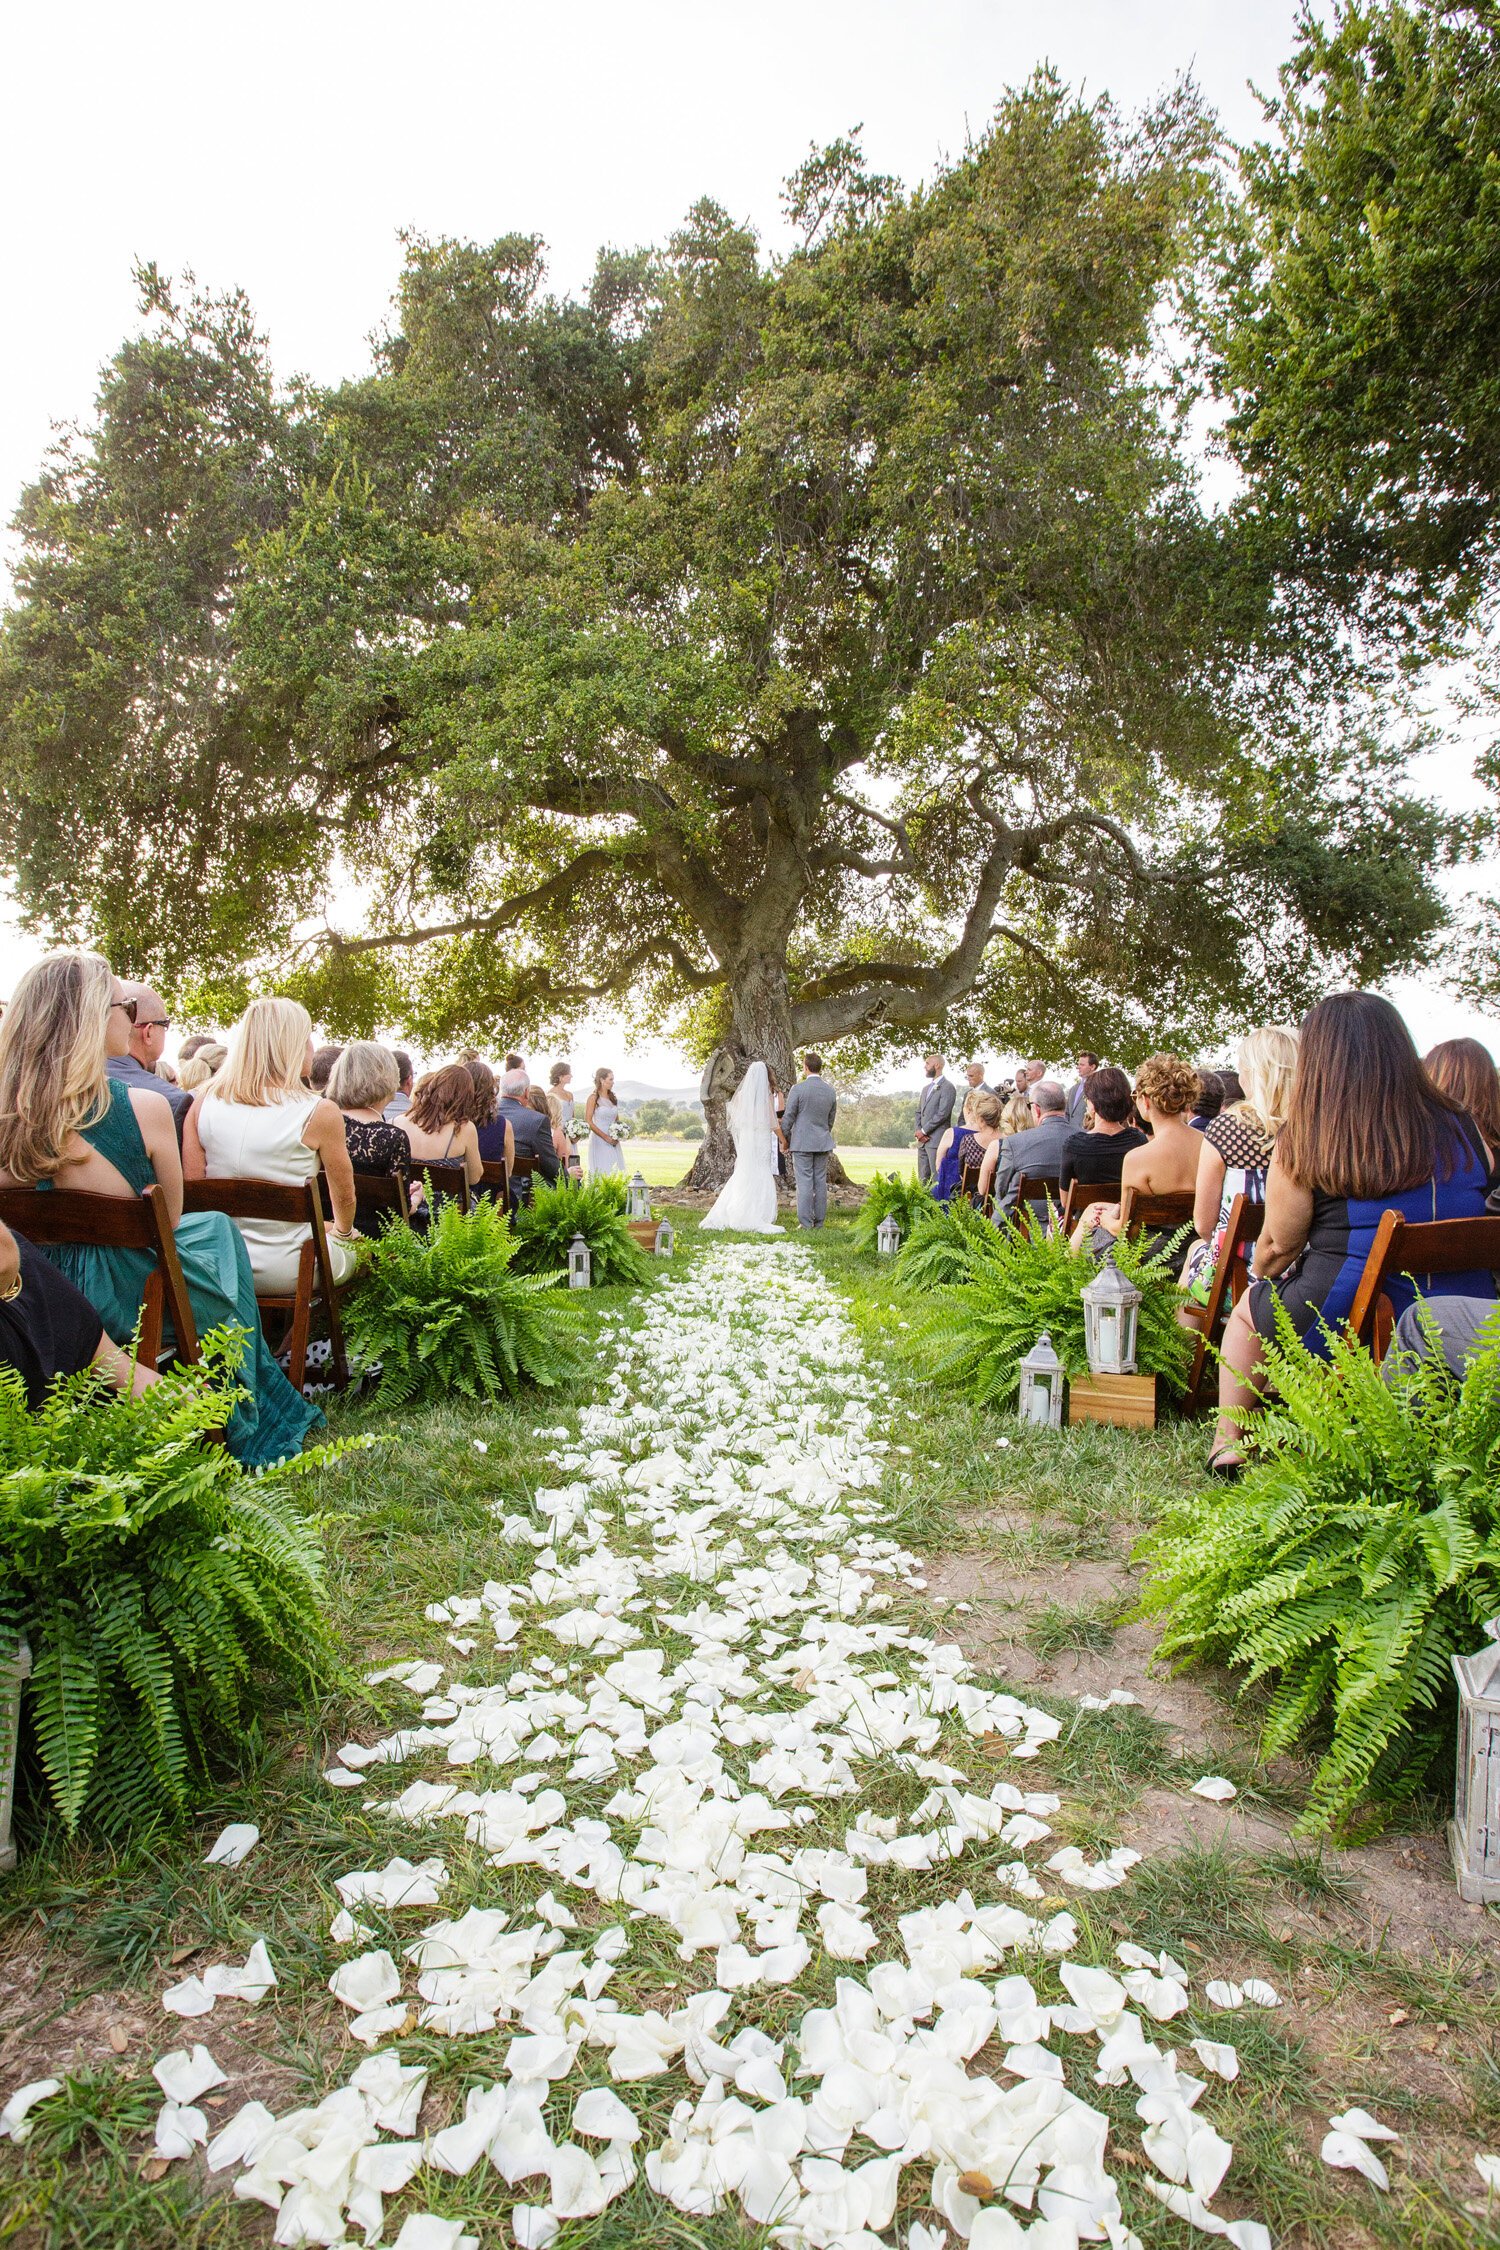 www.santabarbarawedding.com | Mary Jane Photography | Cody Floral Design | Ceremony Aisle Covered in White Flower Petals